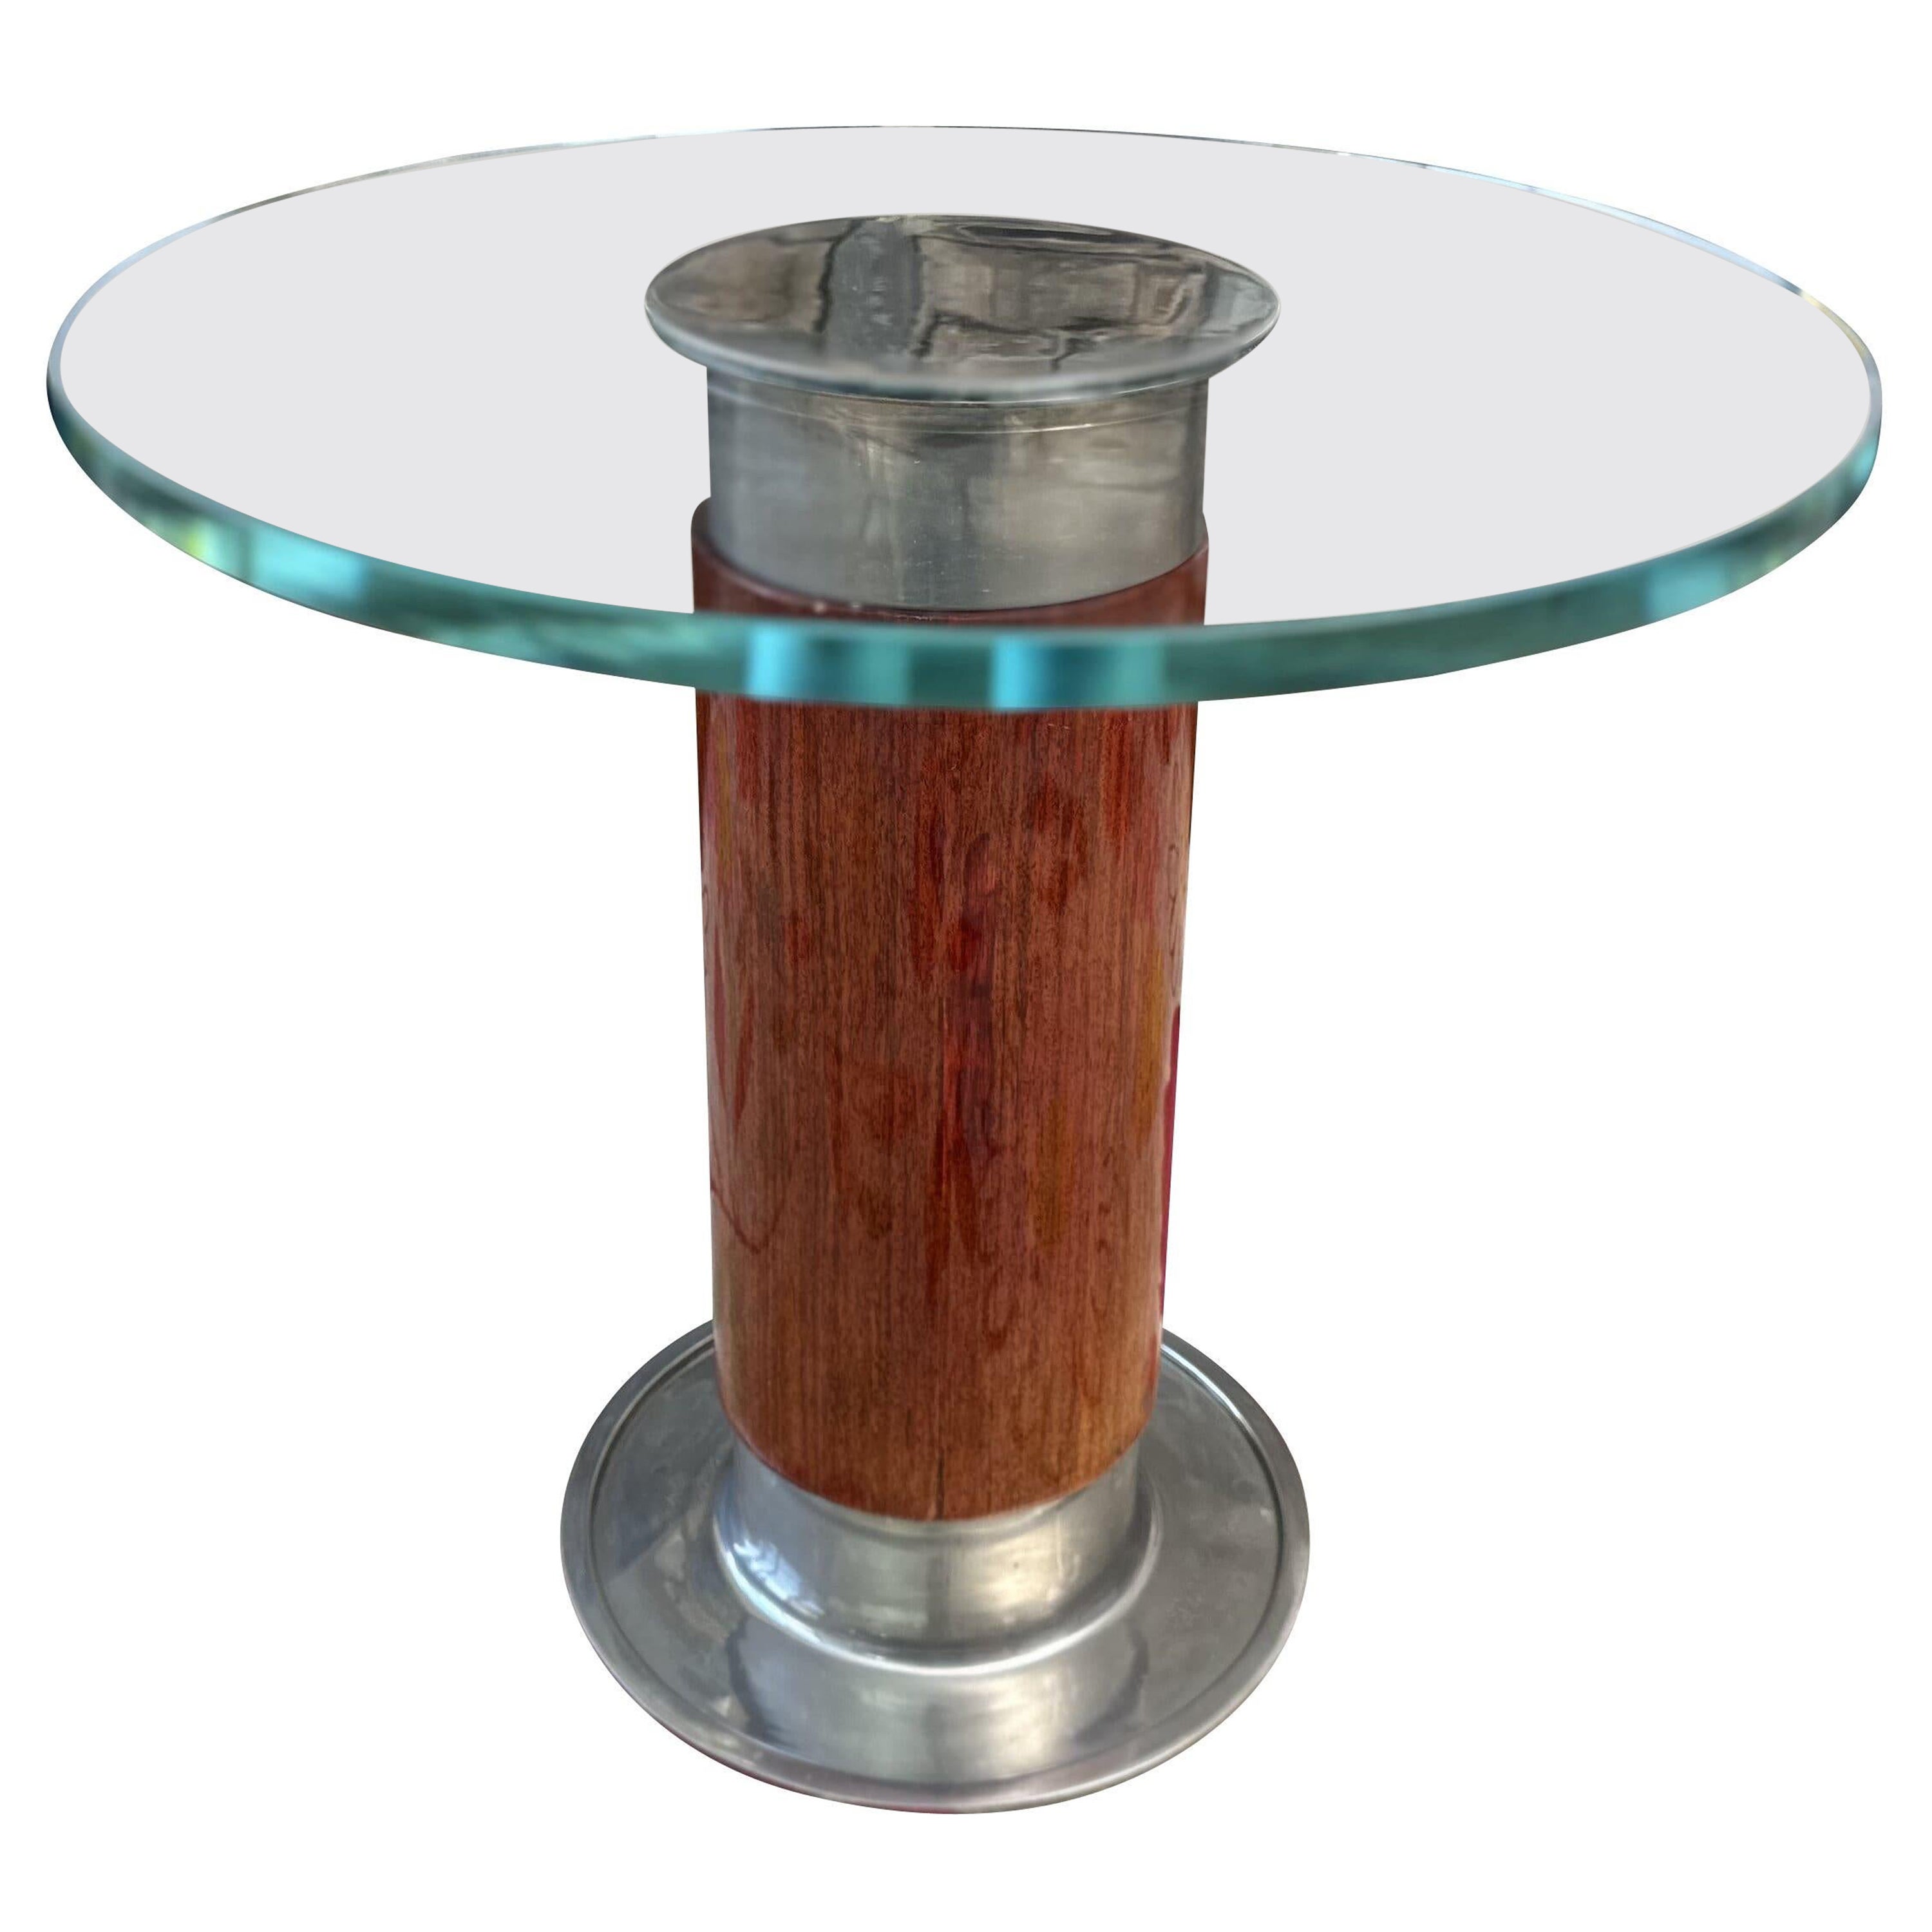 French Art Deco Rosewood Chrome and Glass Guéridon side coffee table circa 1930 For Sale